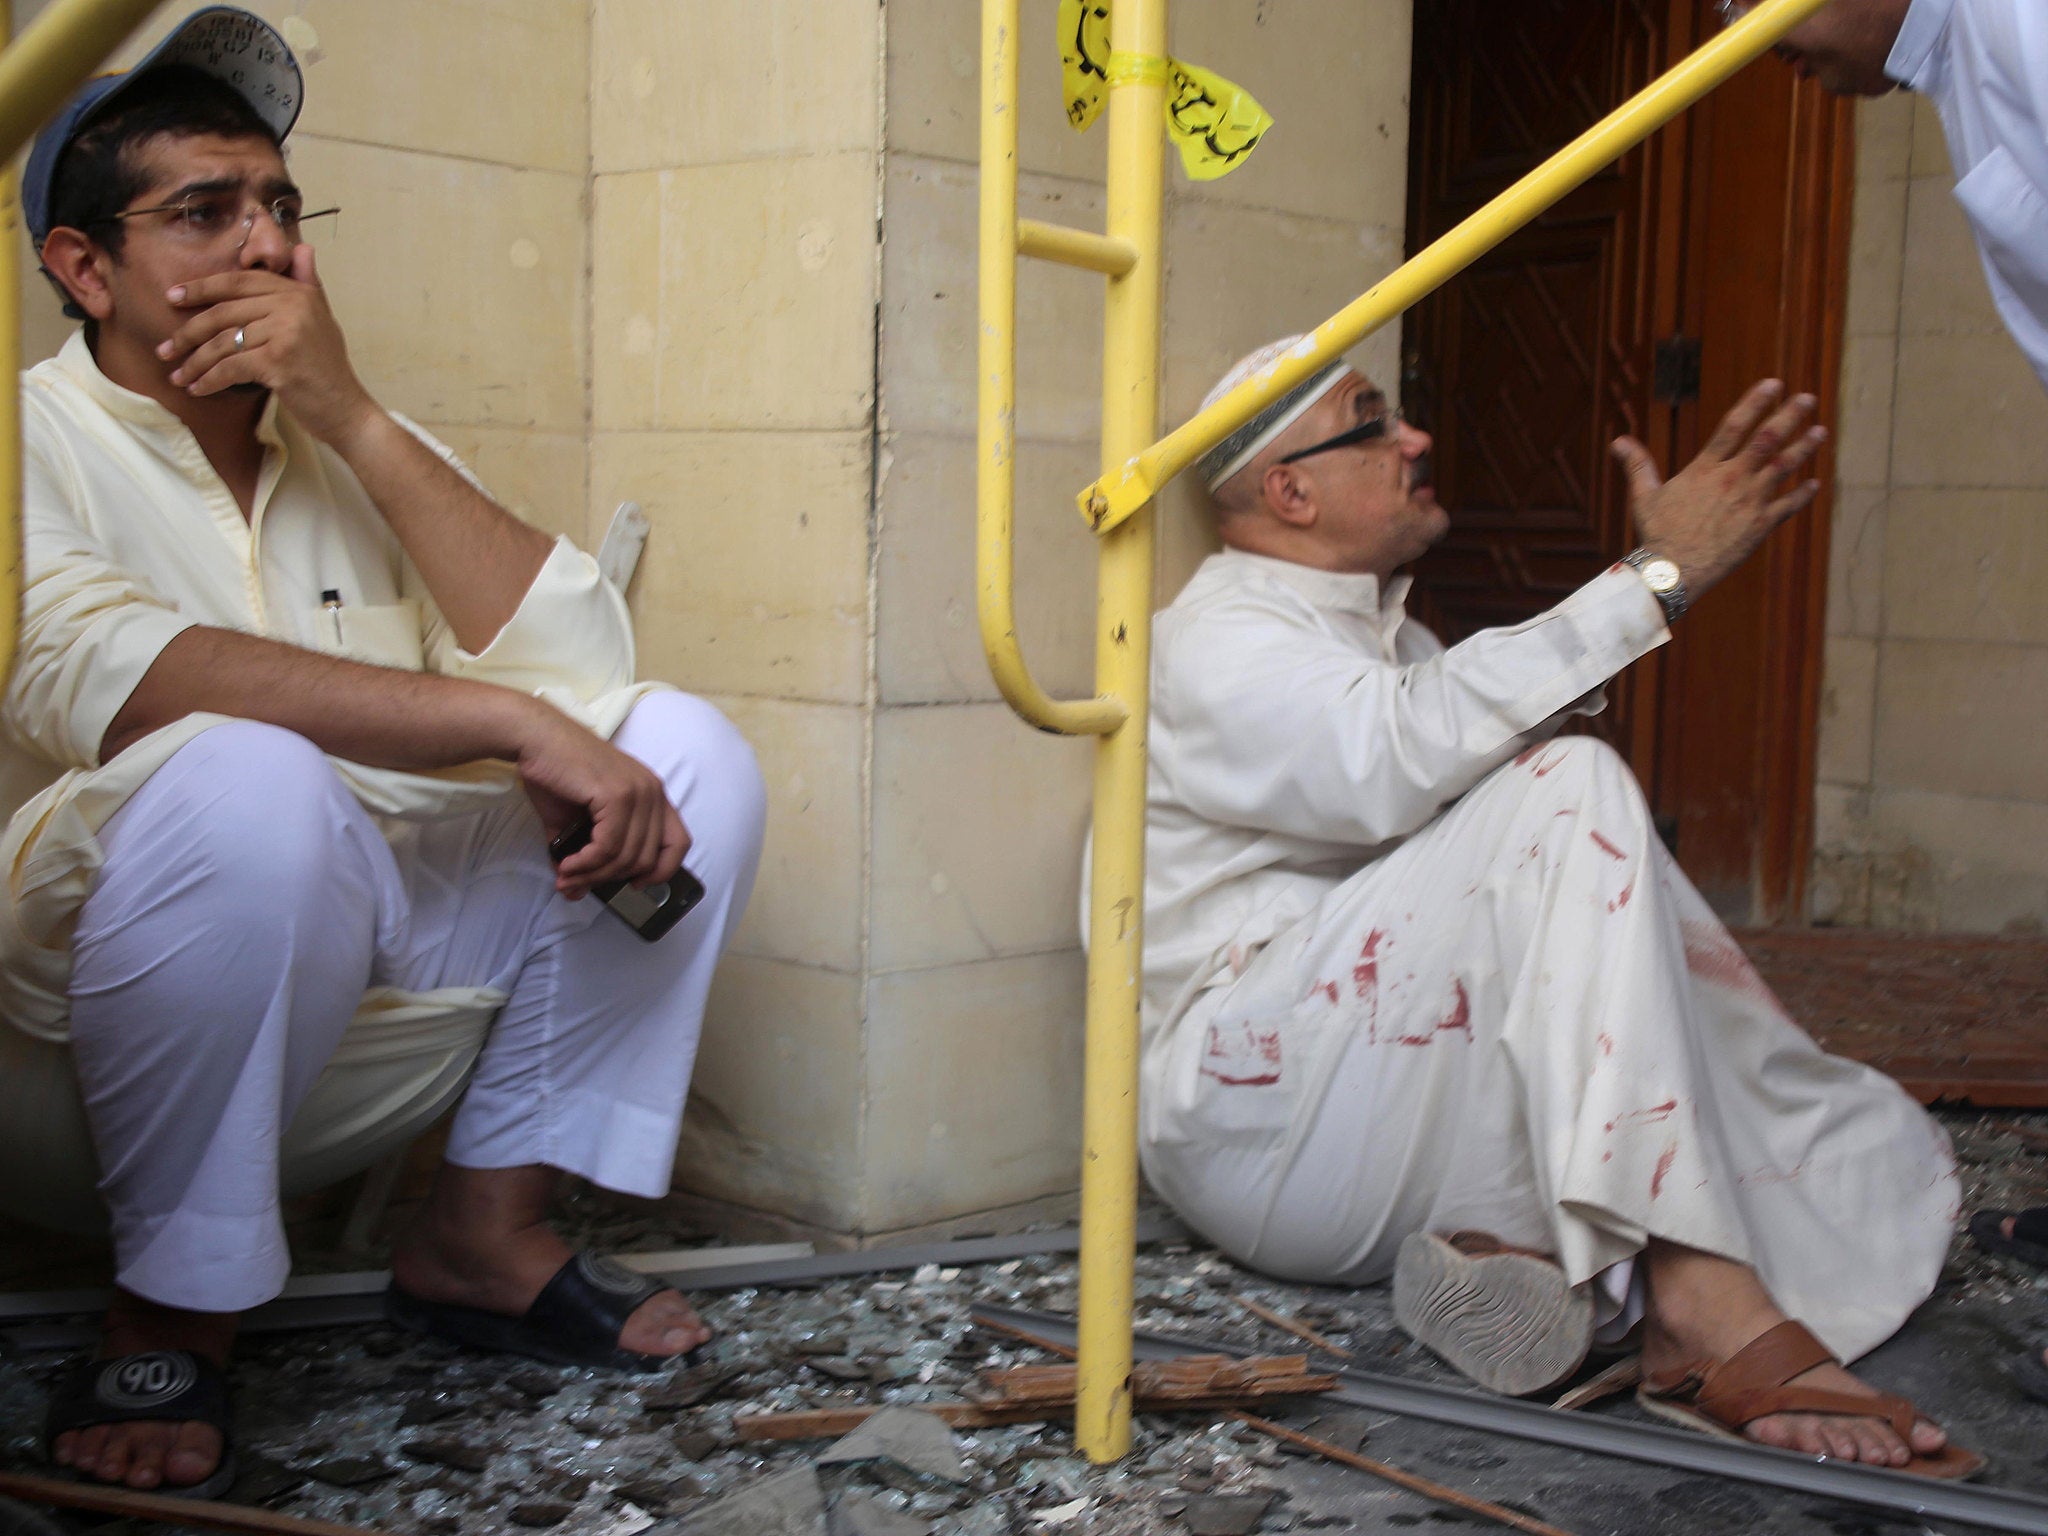 Two men react to the chaos caused by Friday's suicide bombing